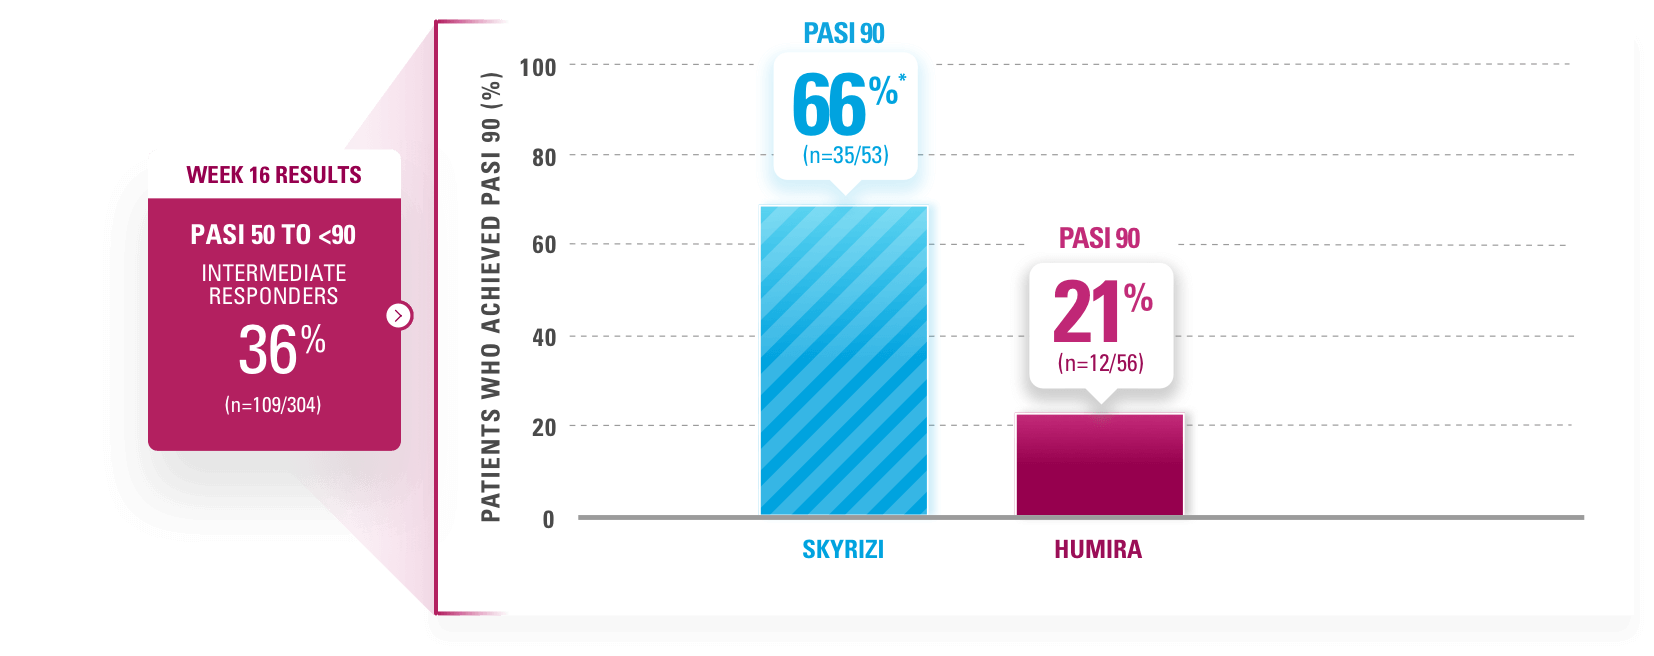 66% of SKYRIZI® patients achieved PASI 90 vs 21% of HUMIRA® patients at week 44.